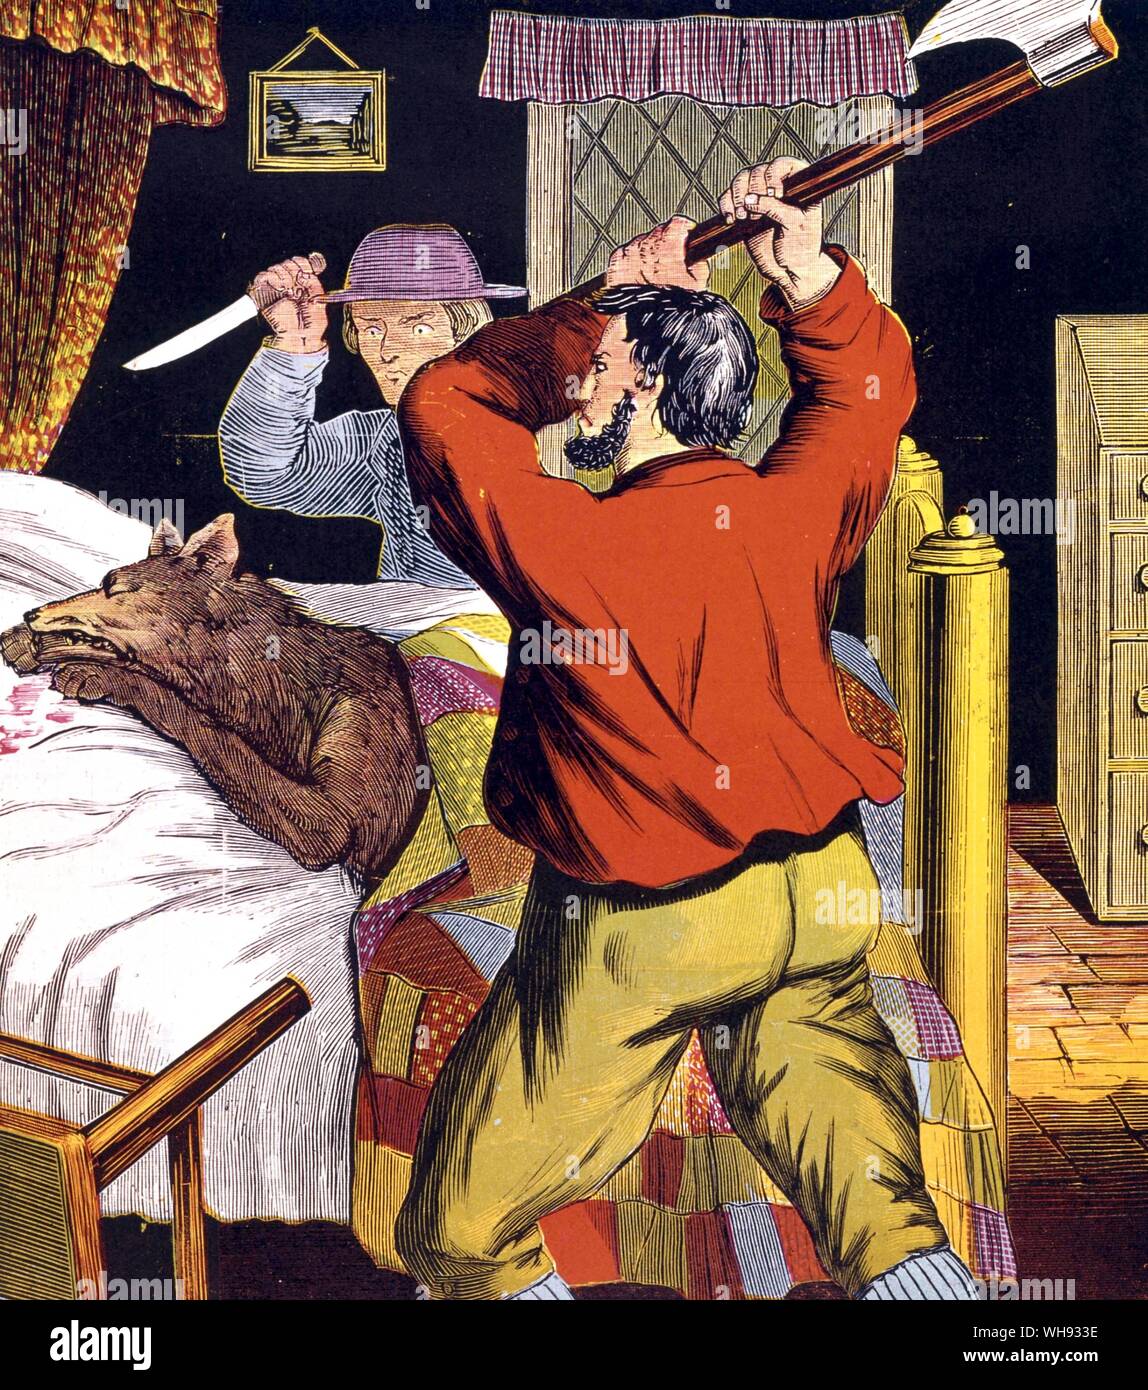 Red Riding Hood's death avenged. Illustration by W Tomlinson from Grandmama Goodsoul's edition of the story, c.1880. Stock Photo